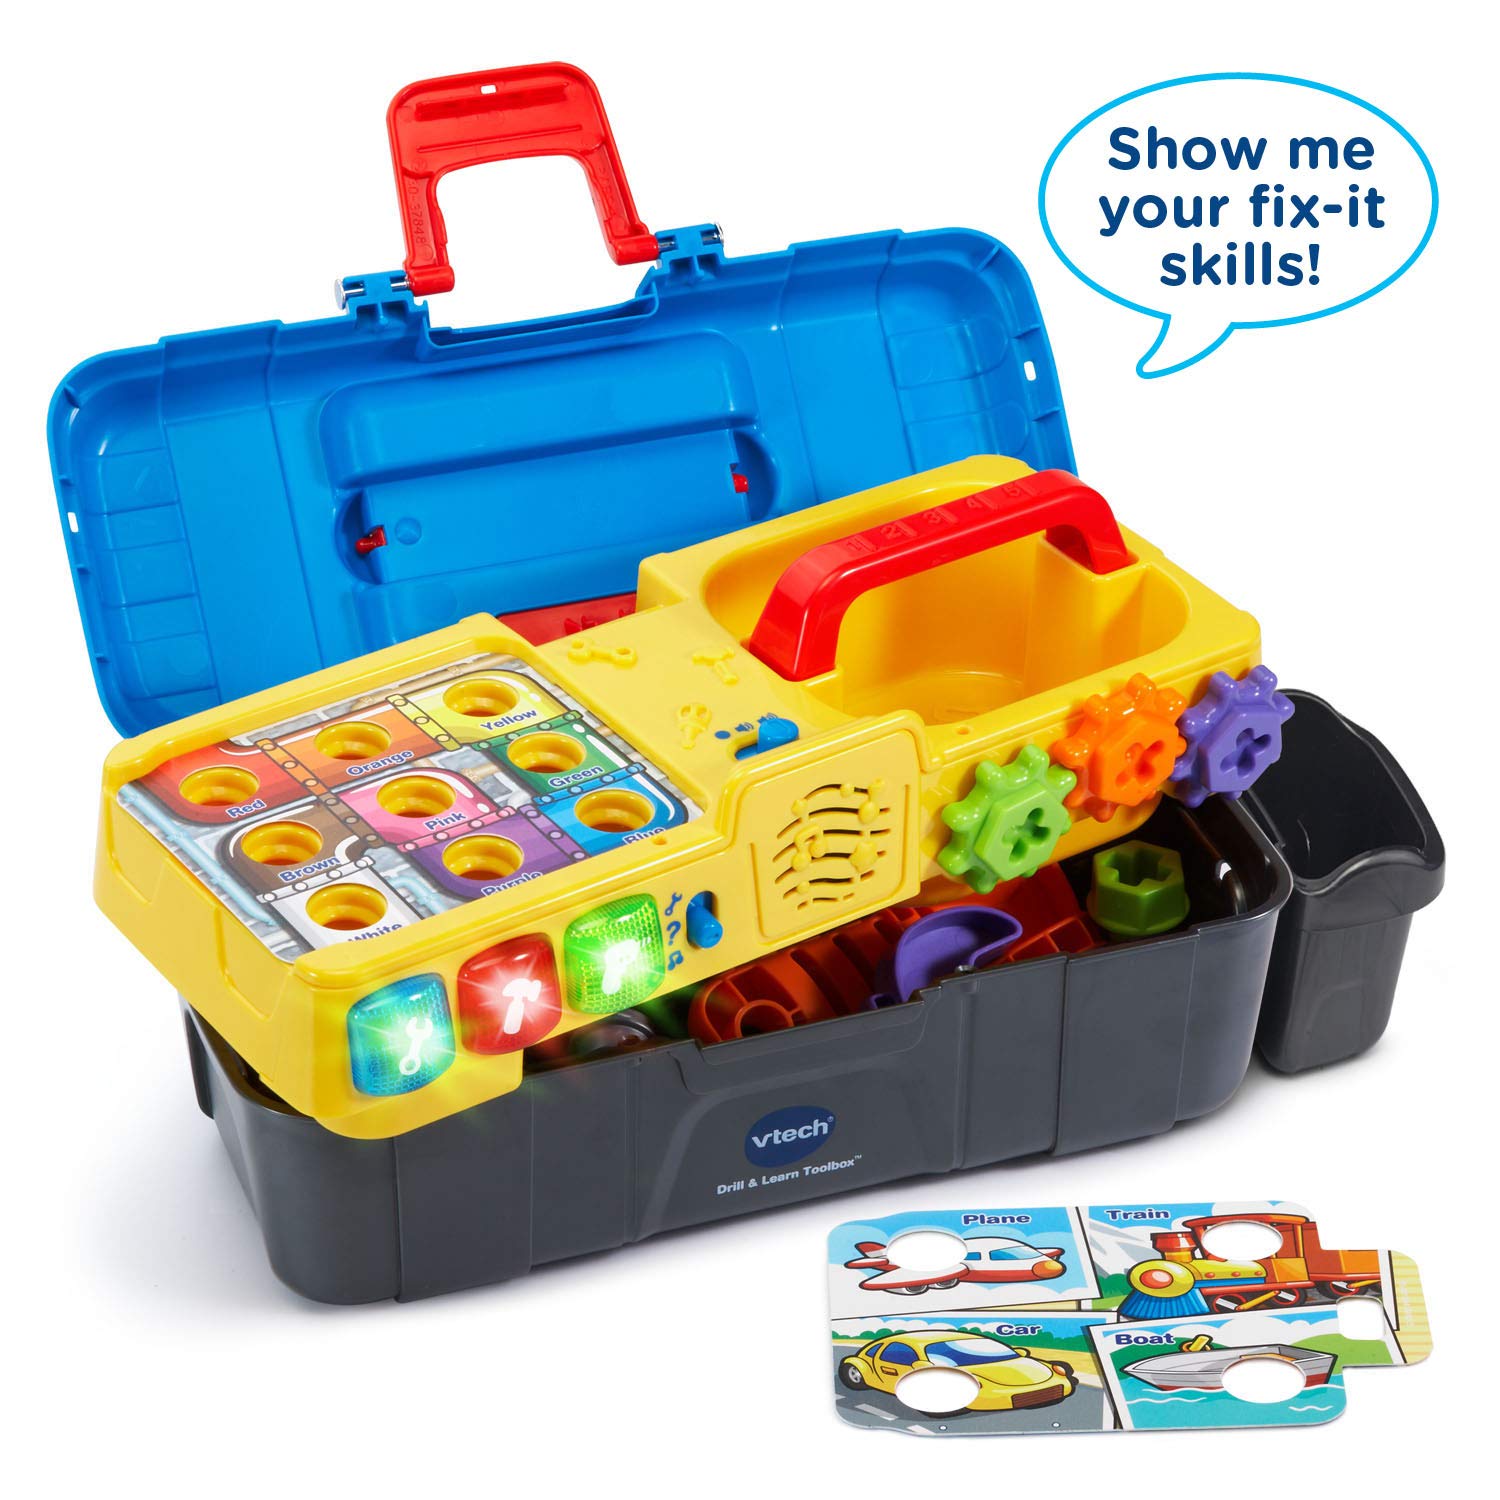 VTech Drill and Learn Toolbox Amazon Exclusive , Orange